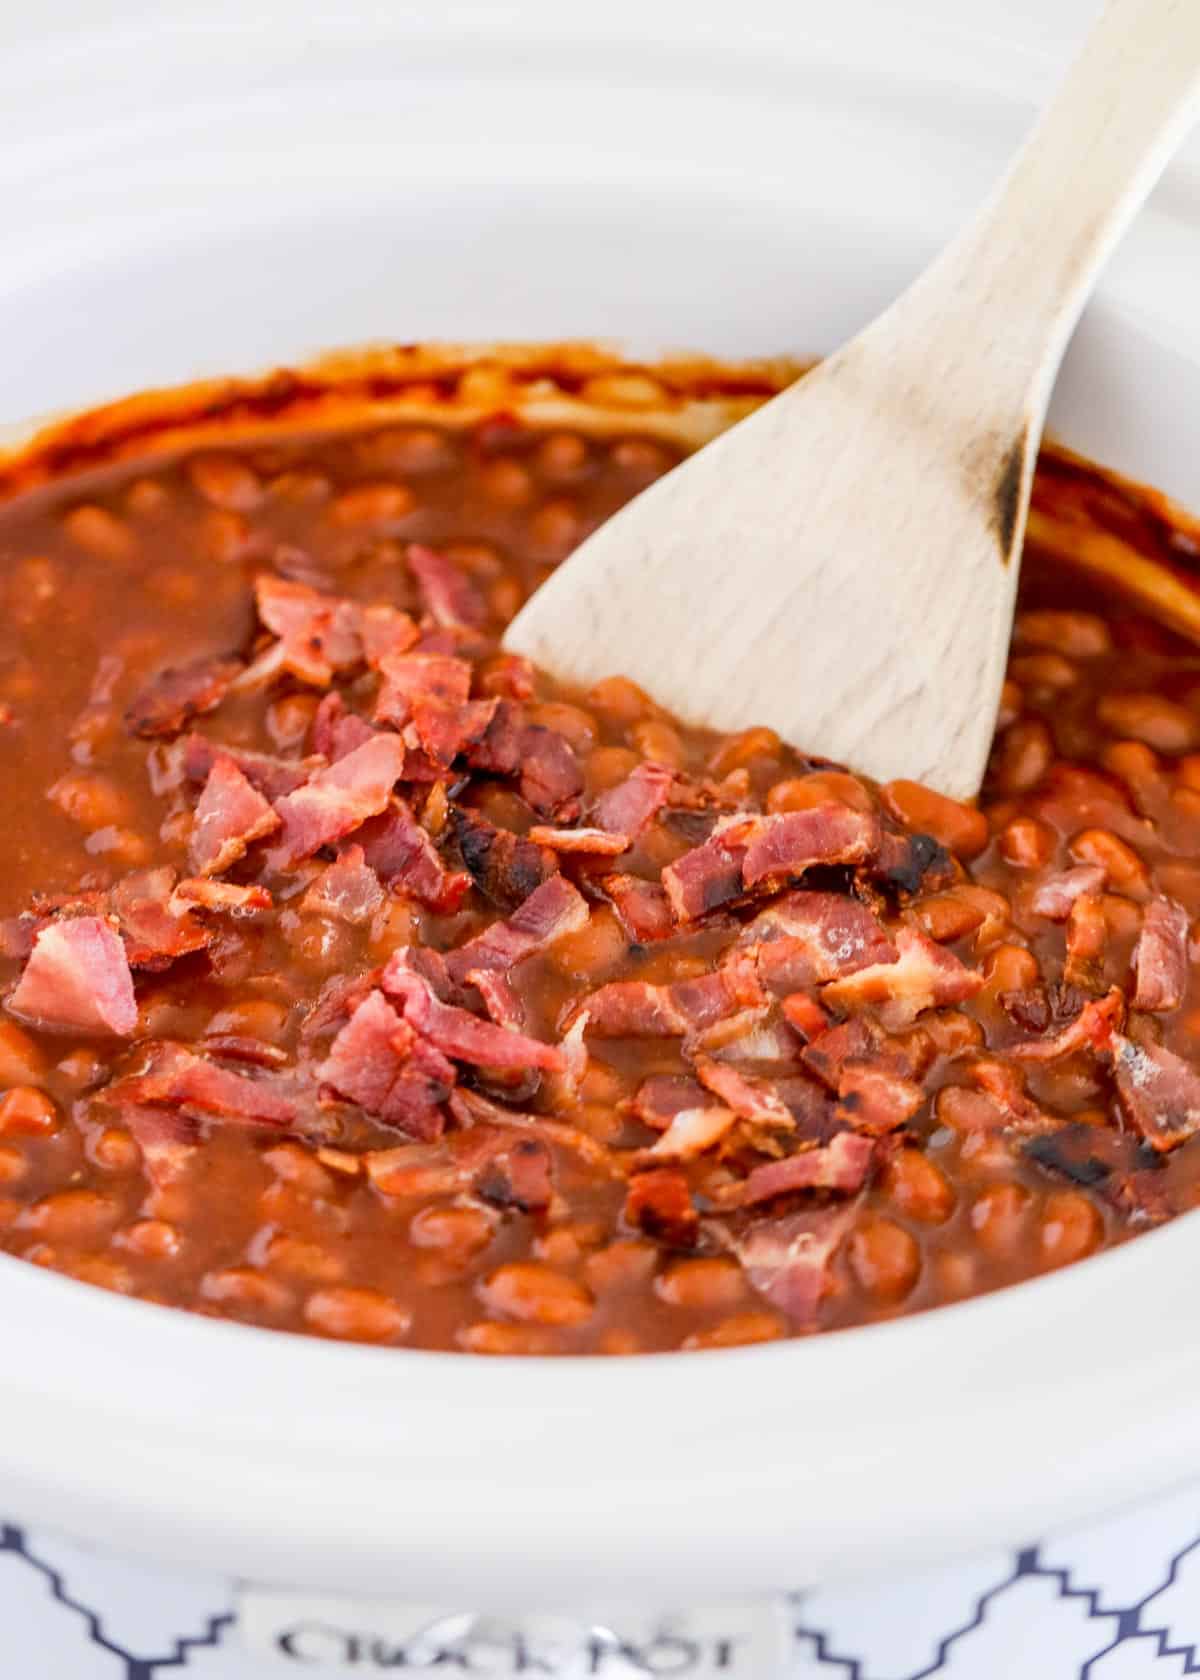 Wooden spoon in baked beans.